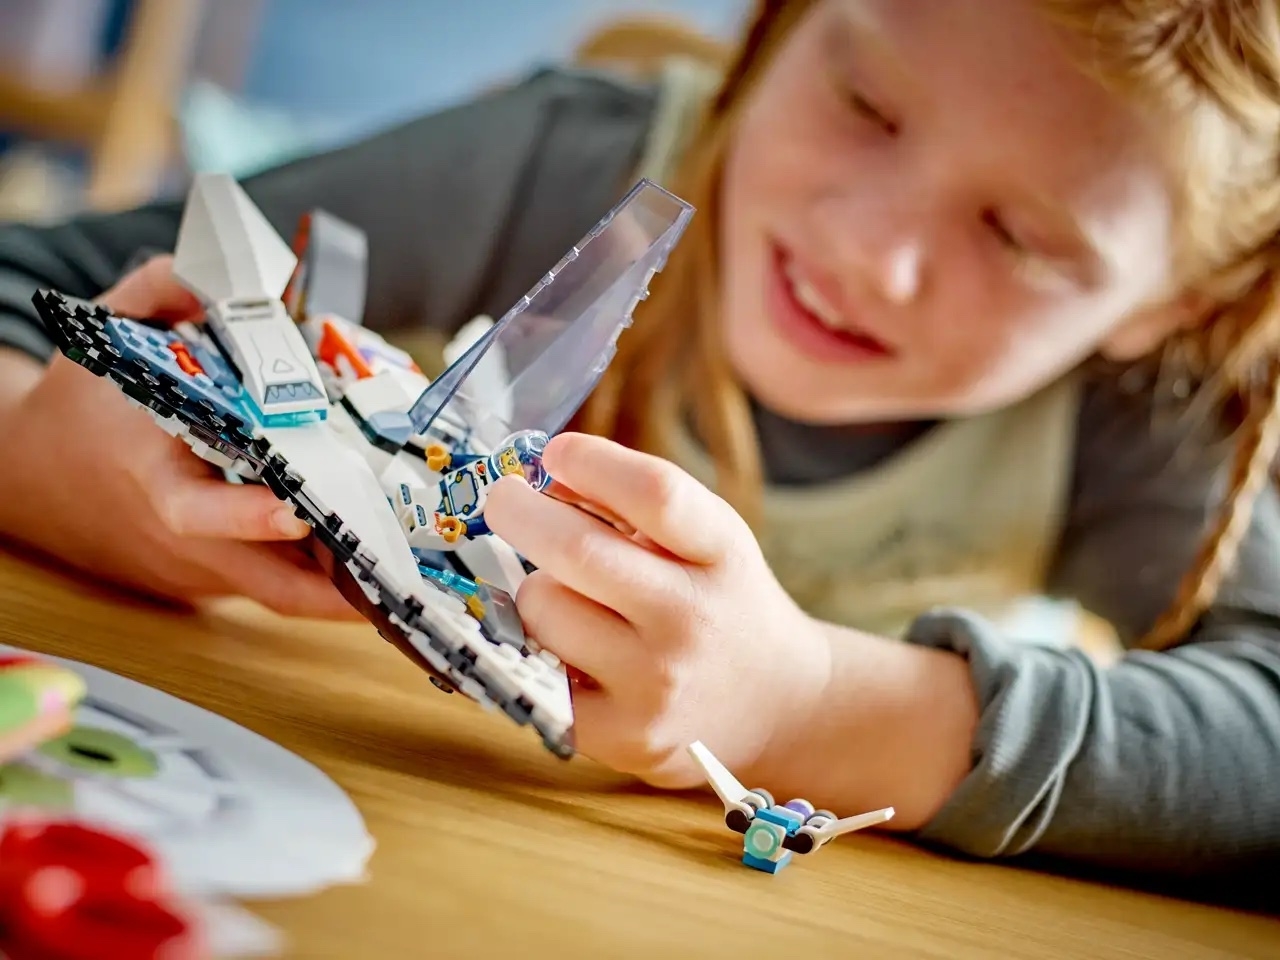 A young girl plays with a LEGO spaceship